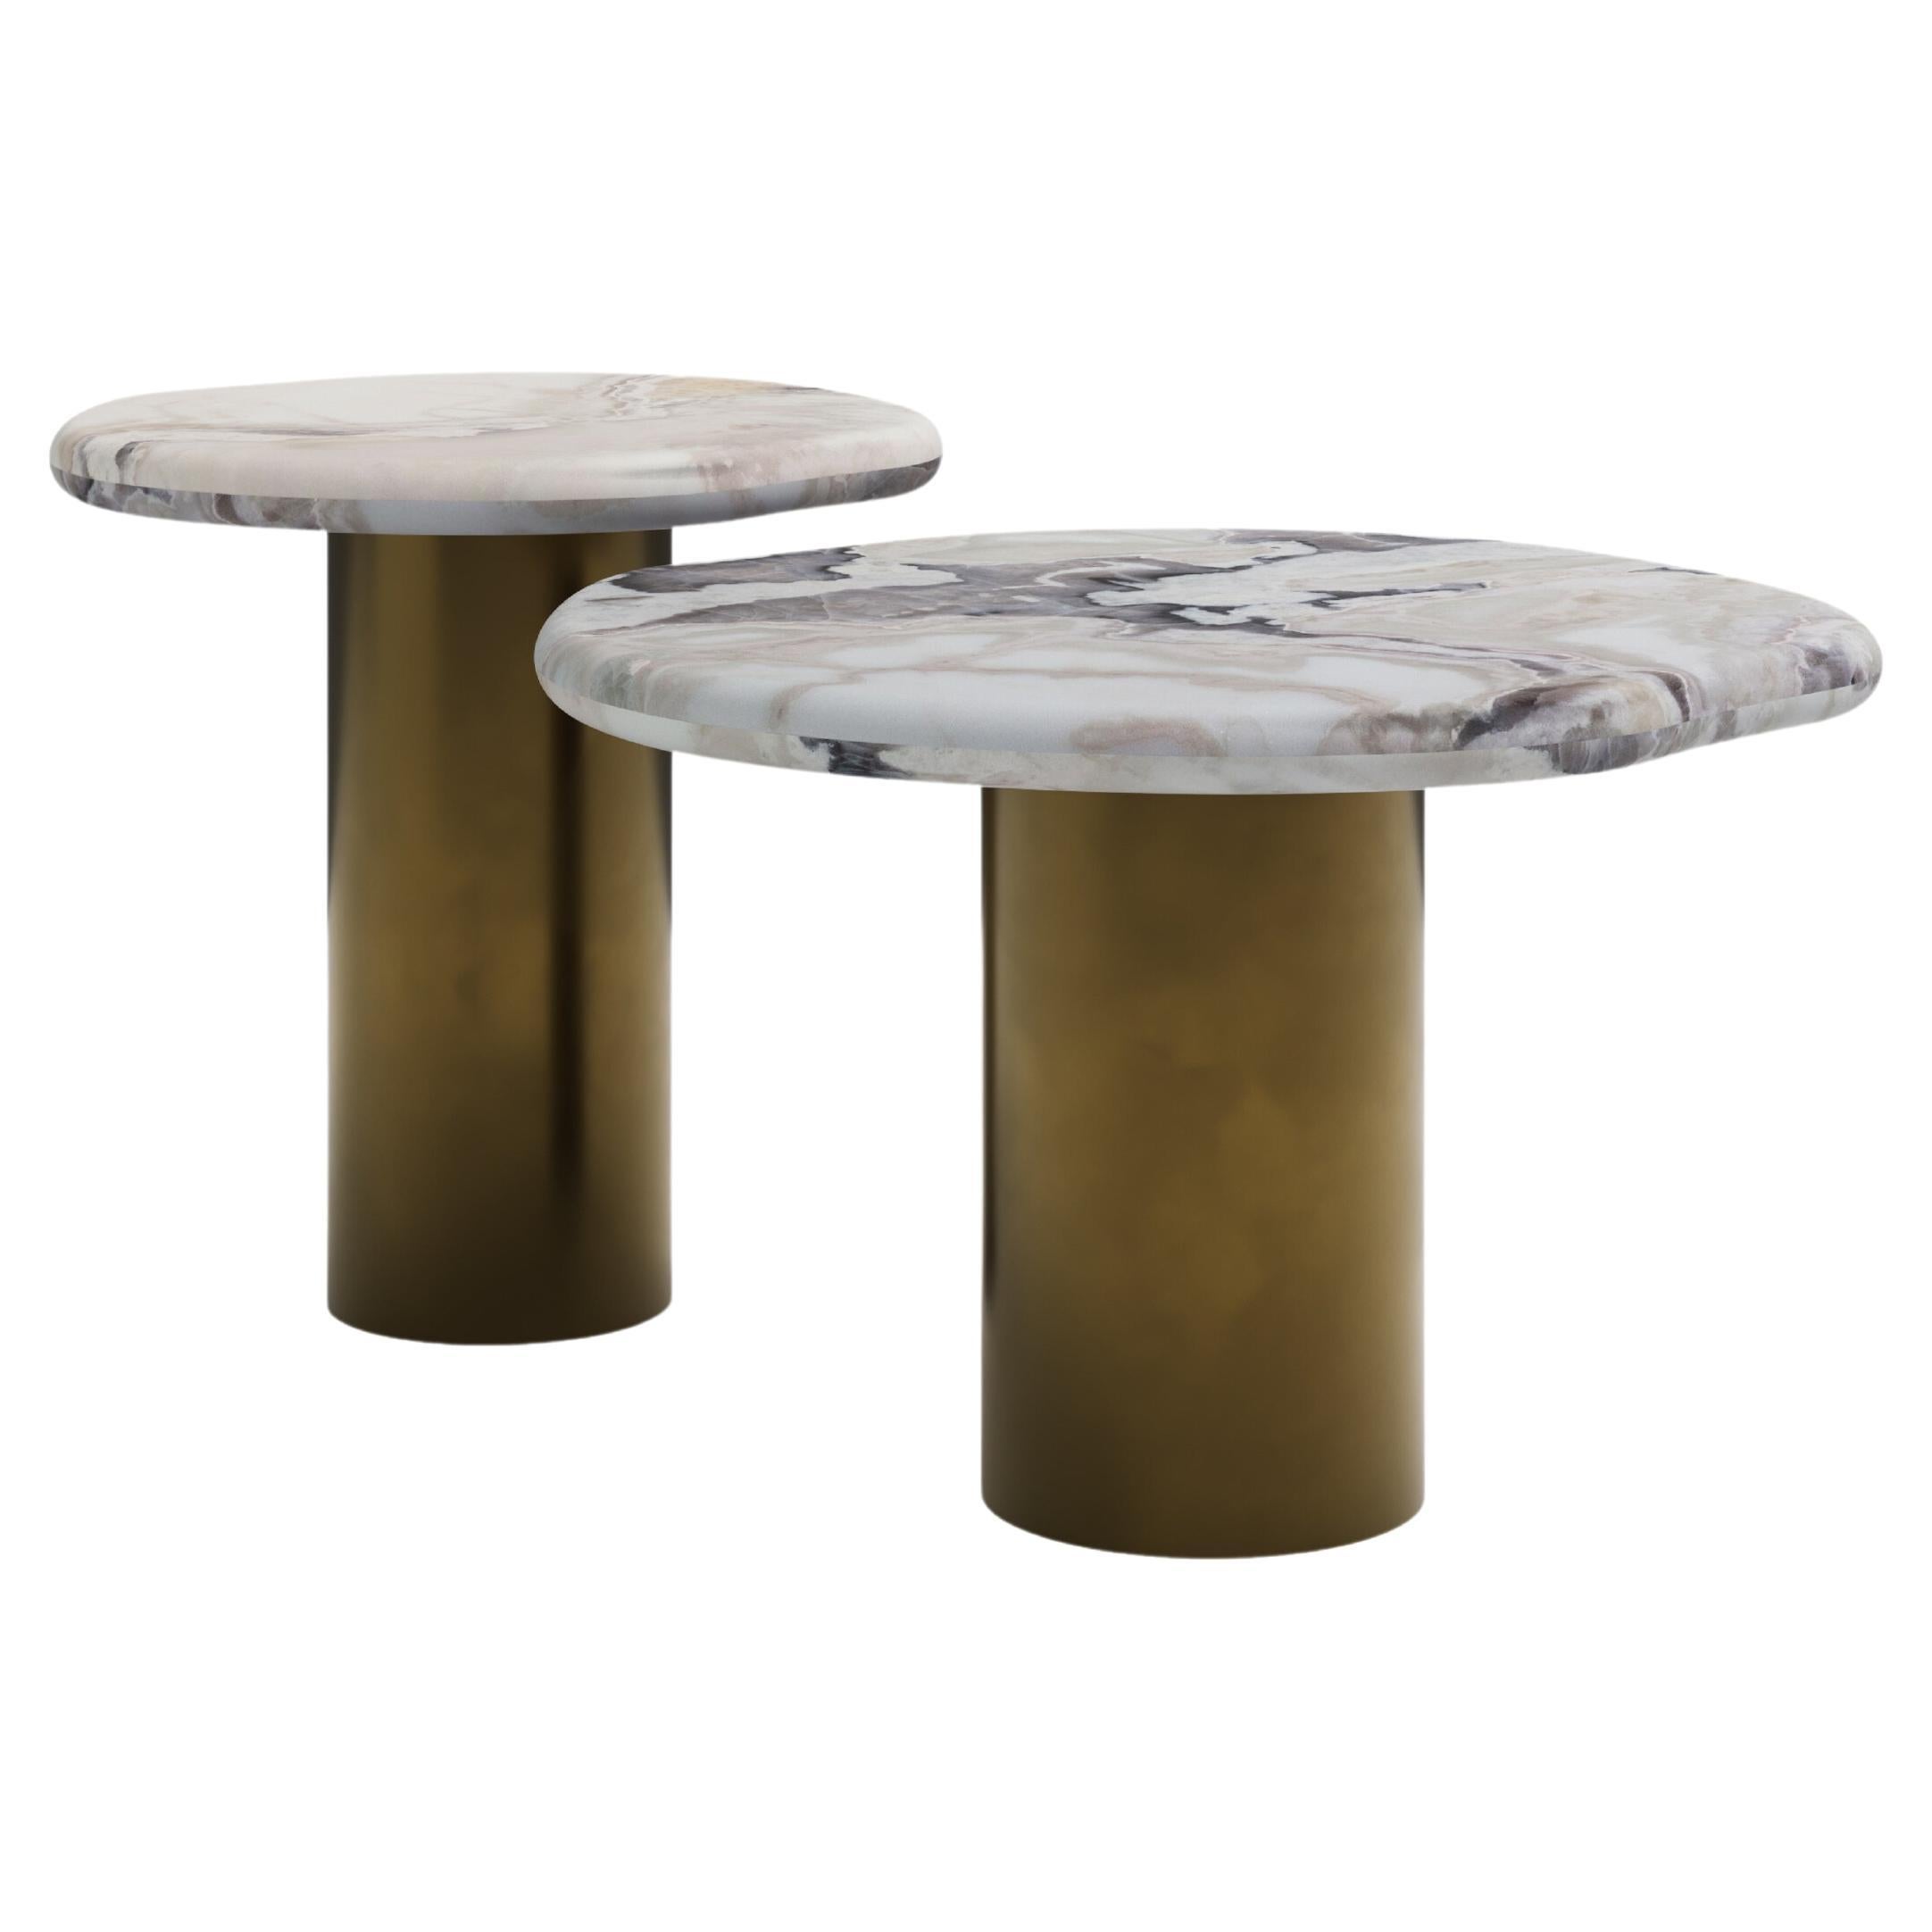 FORM(LA) Lago Round Side Table 18”L x 18”W x 18”H Oyster Marble & Antique Bronze